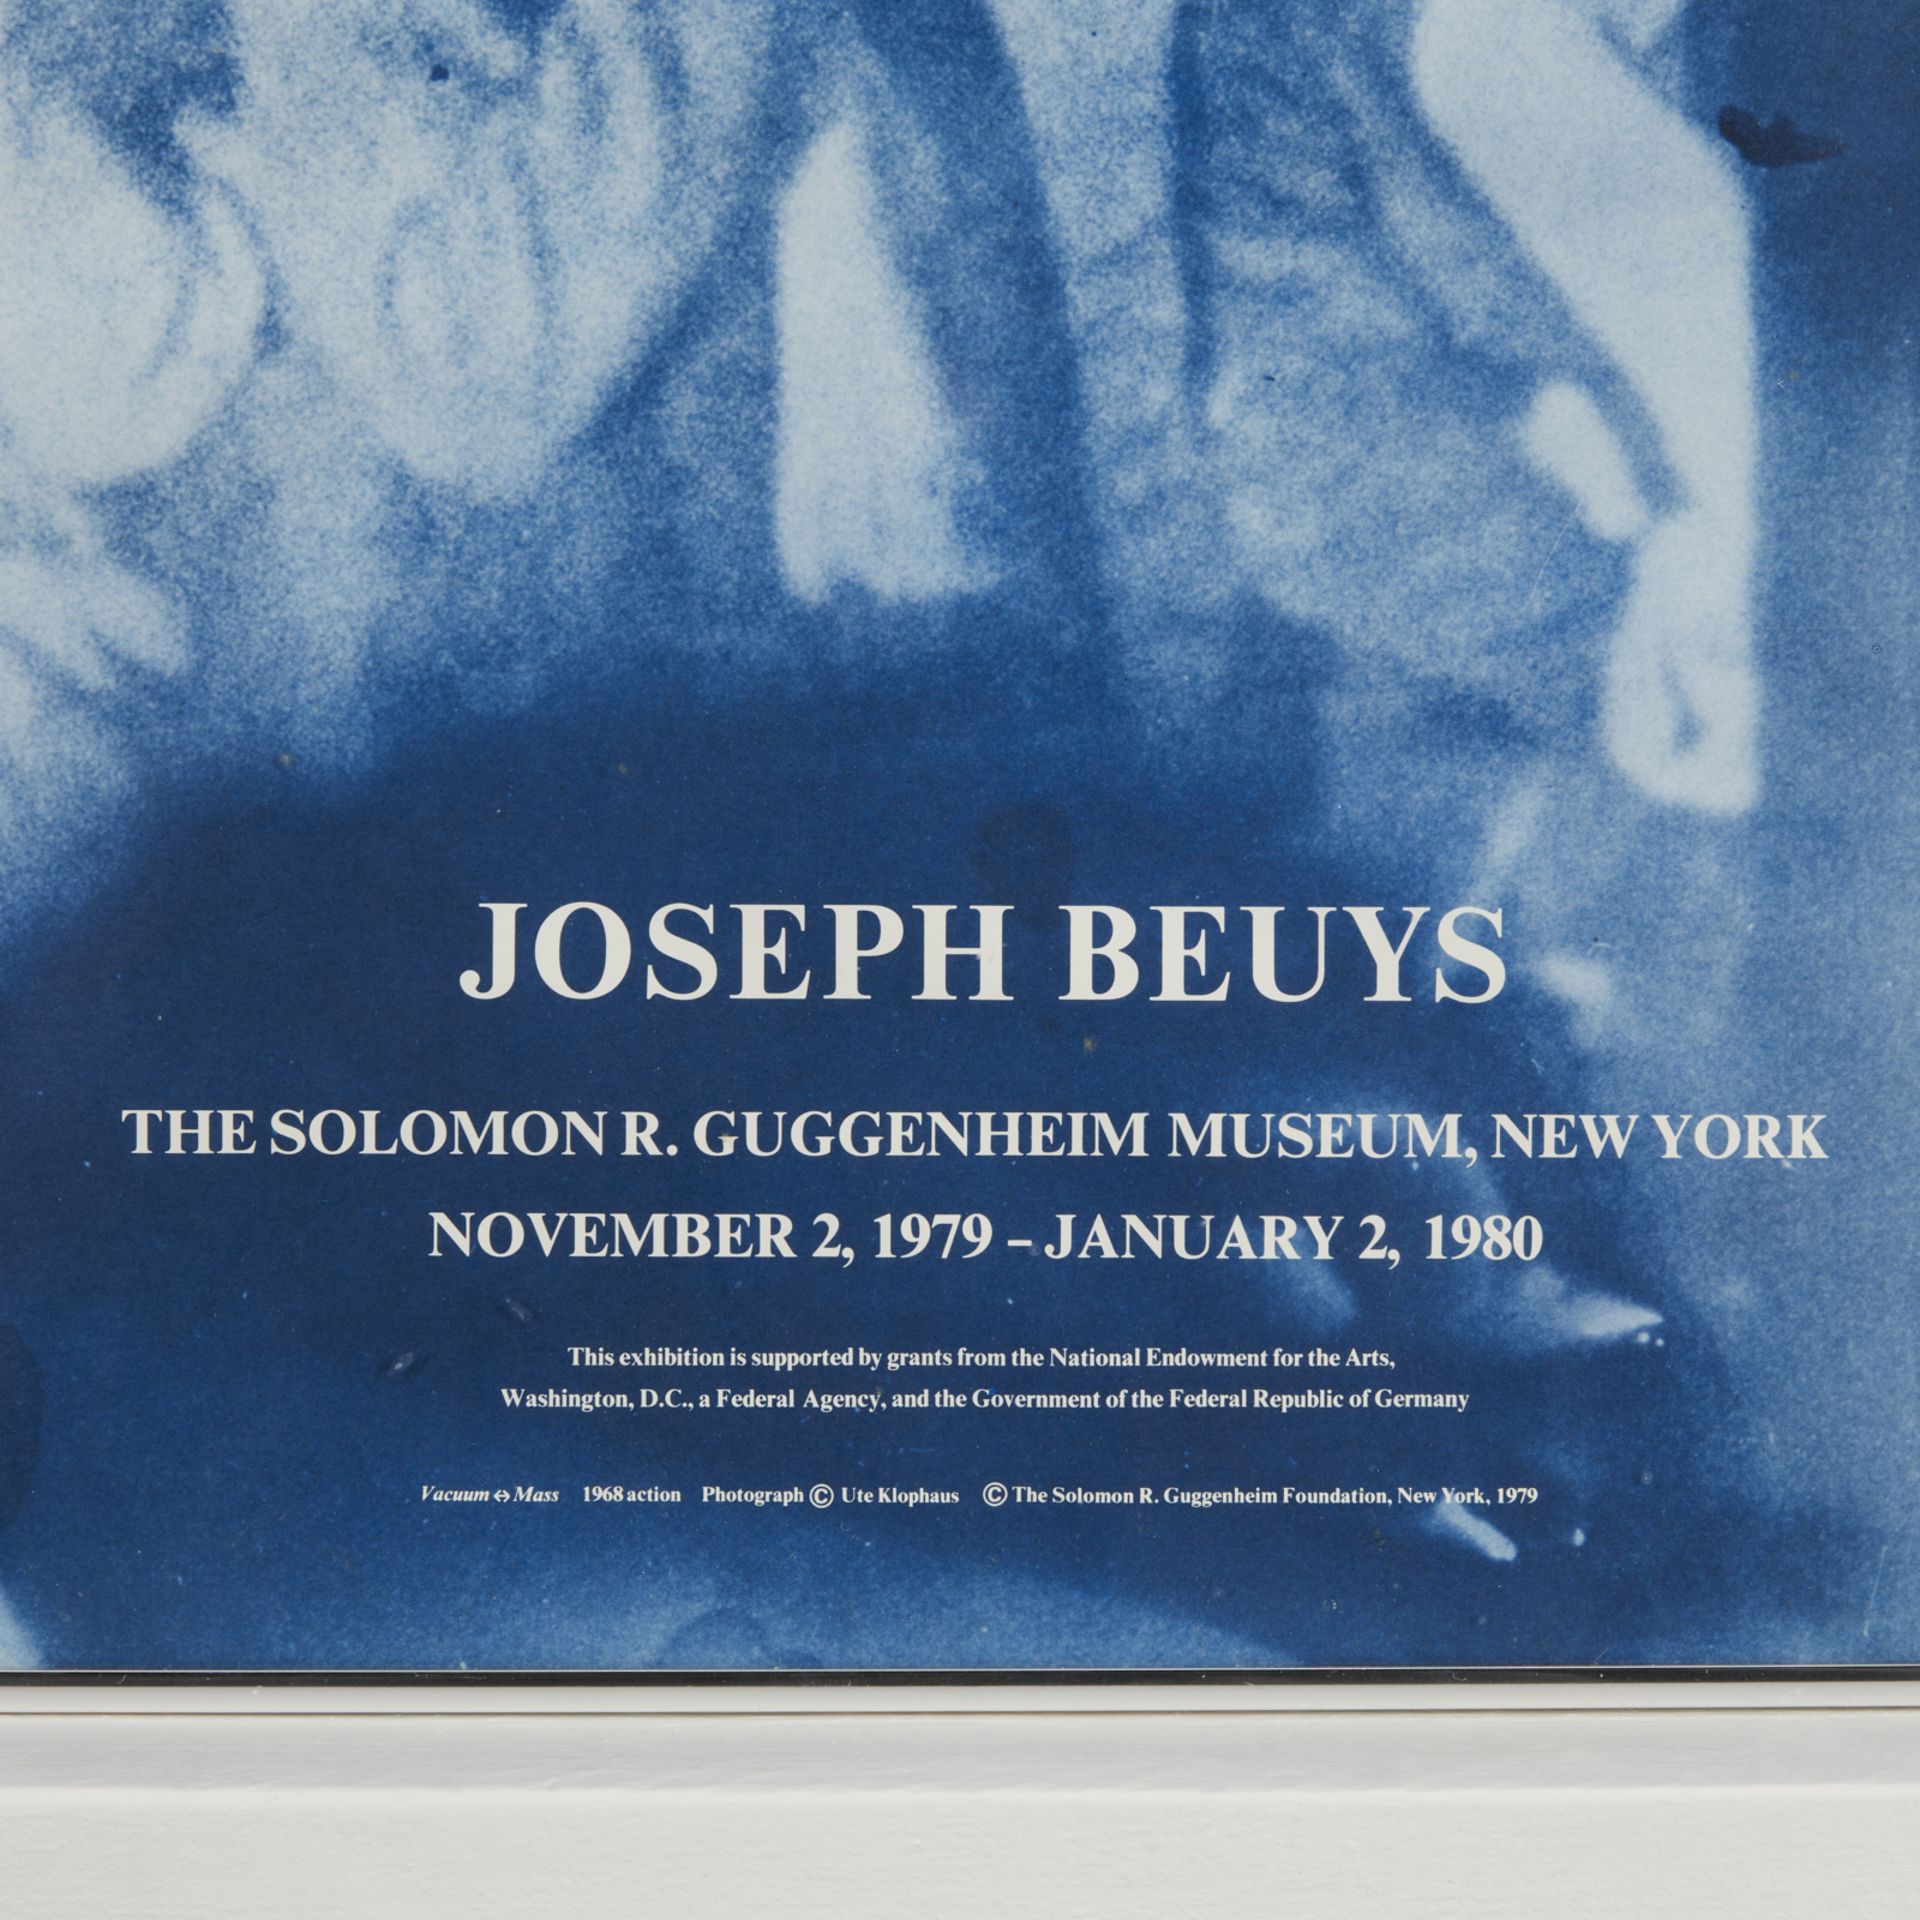 Joseph Beuys Signed Guggenheim Exhibition Poster - Image 4 of 6